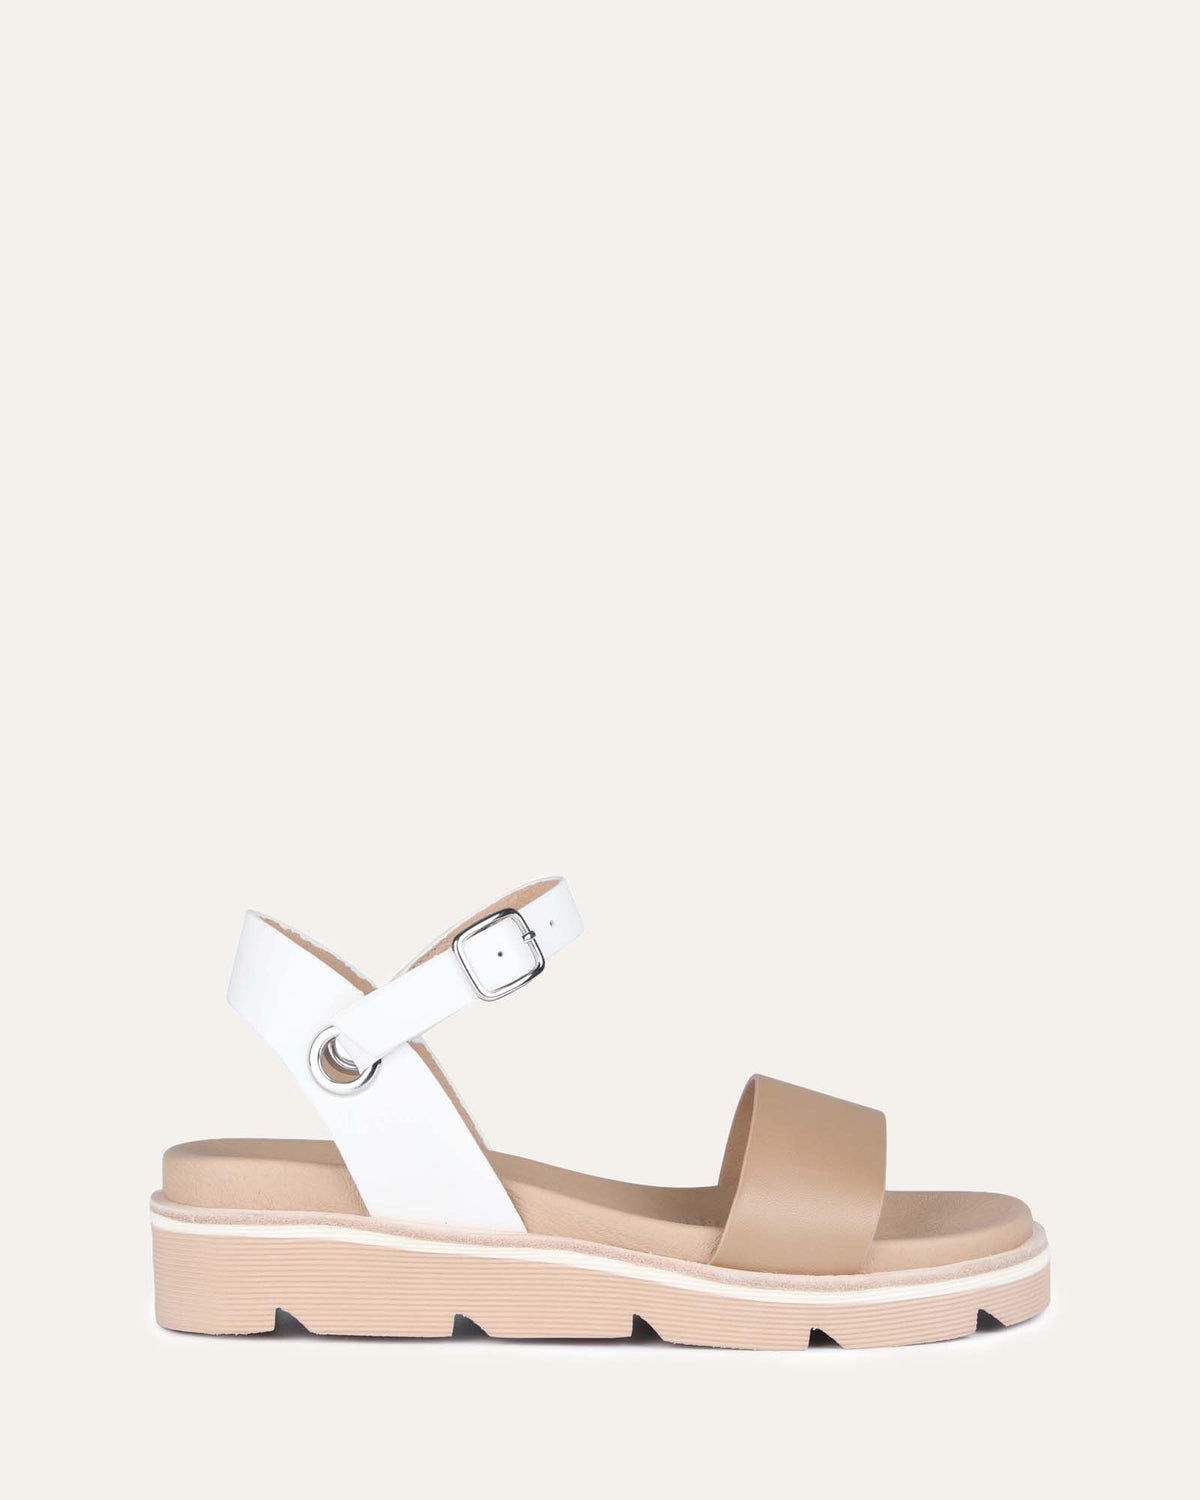 ILLUSION FLAT WEDGE SANDALS WHITE TAN LEATHER